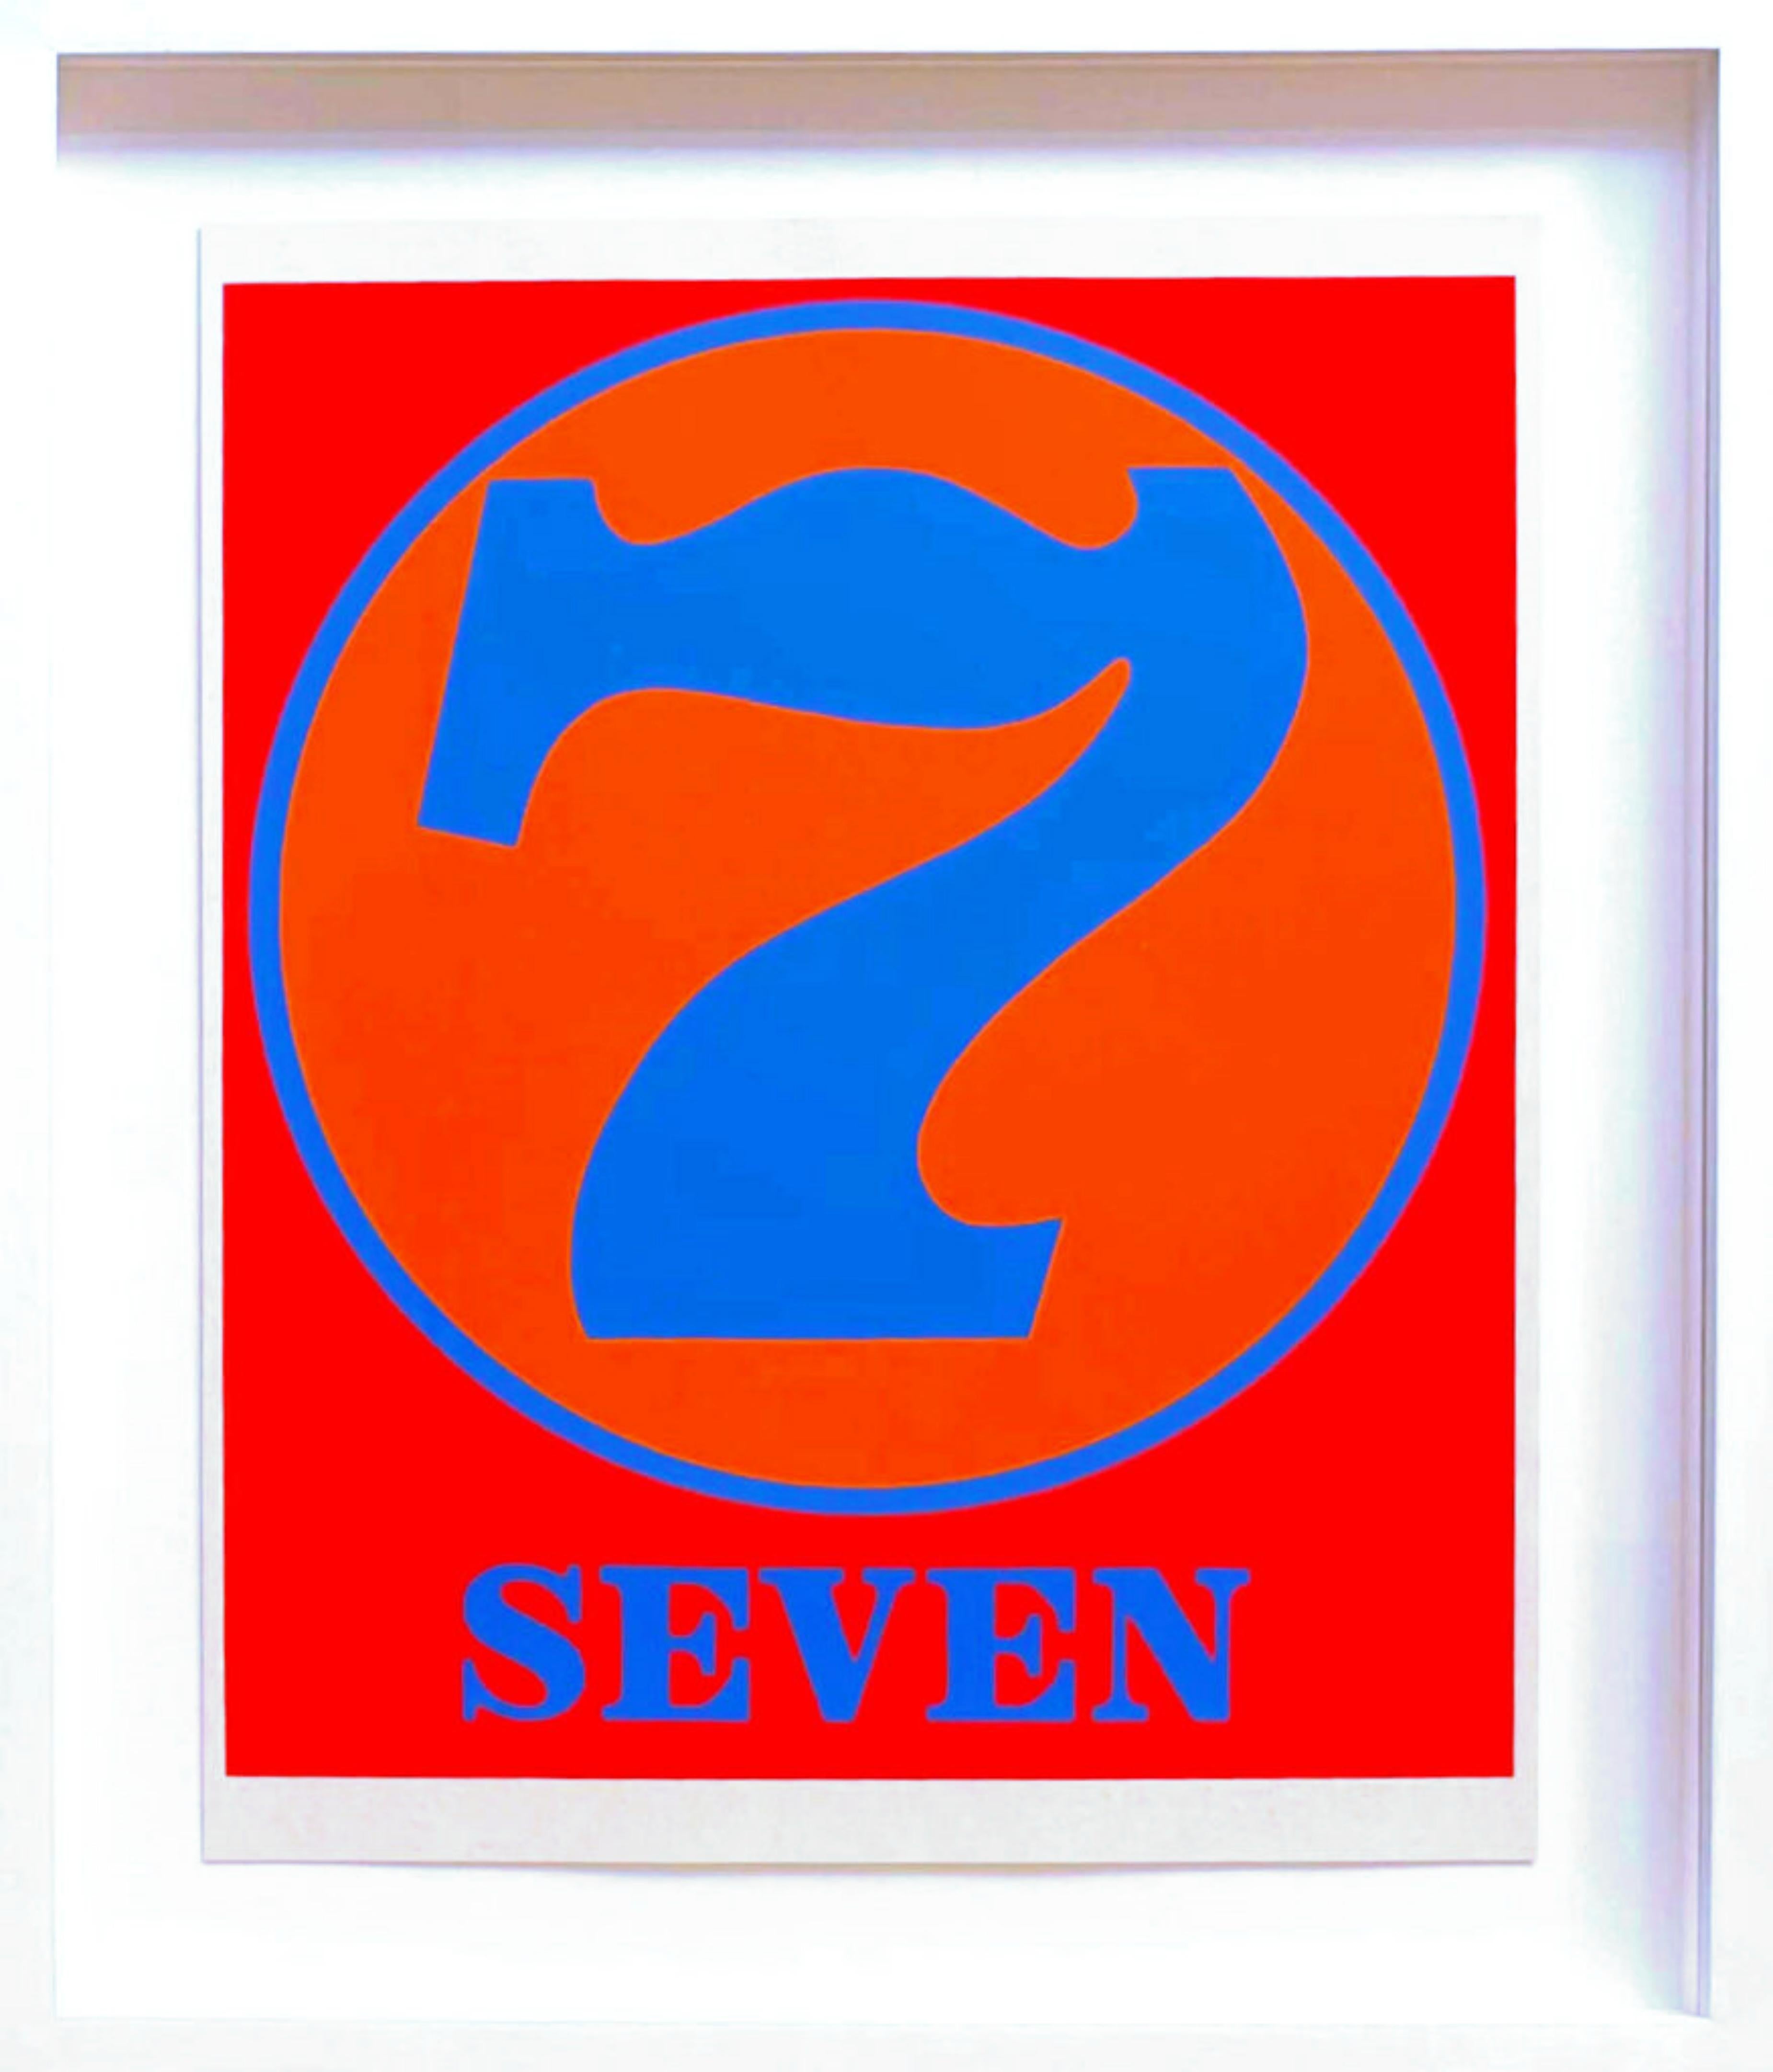 Robert Indiana Abstract Print - 7 (Seven), from the original Numbers portfolio (Sheehan 46-55)